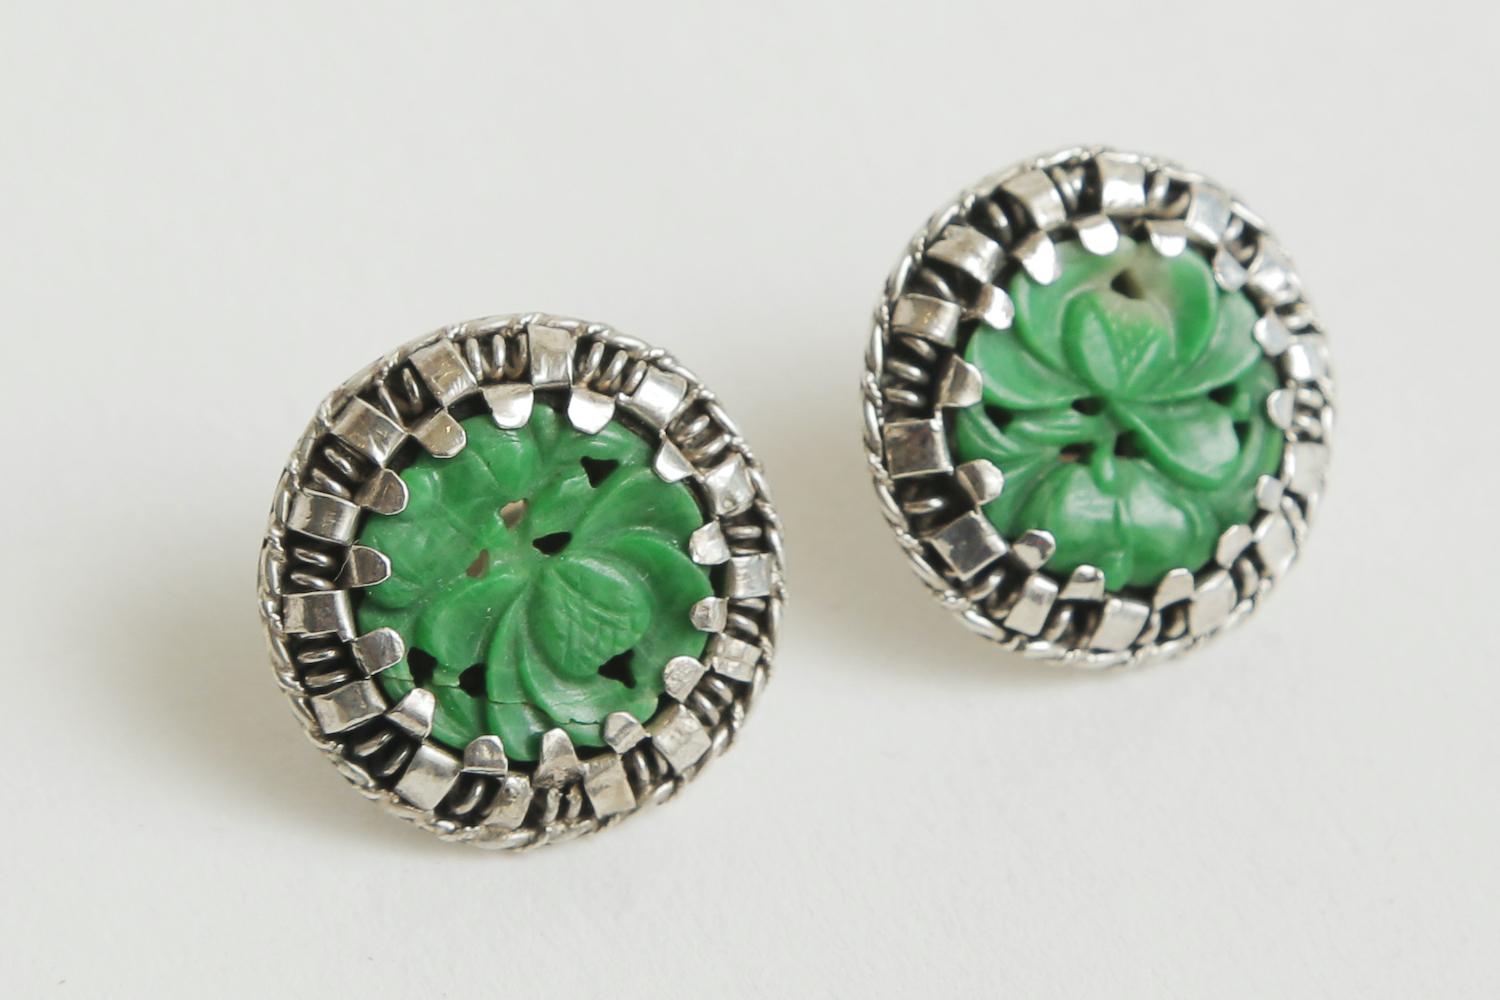 These lovely pierced vintage sterling silver and carved jade earrings are vintage from the 70's.  They have many hallmarks on them. They are from China.